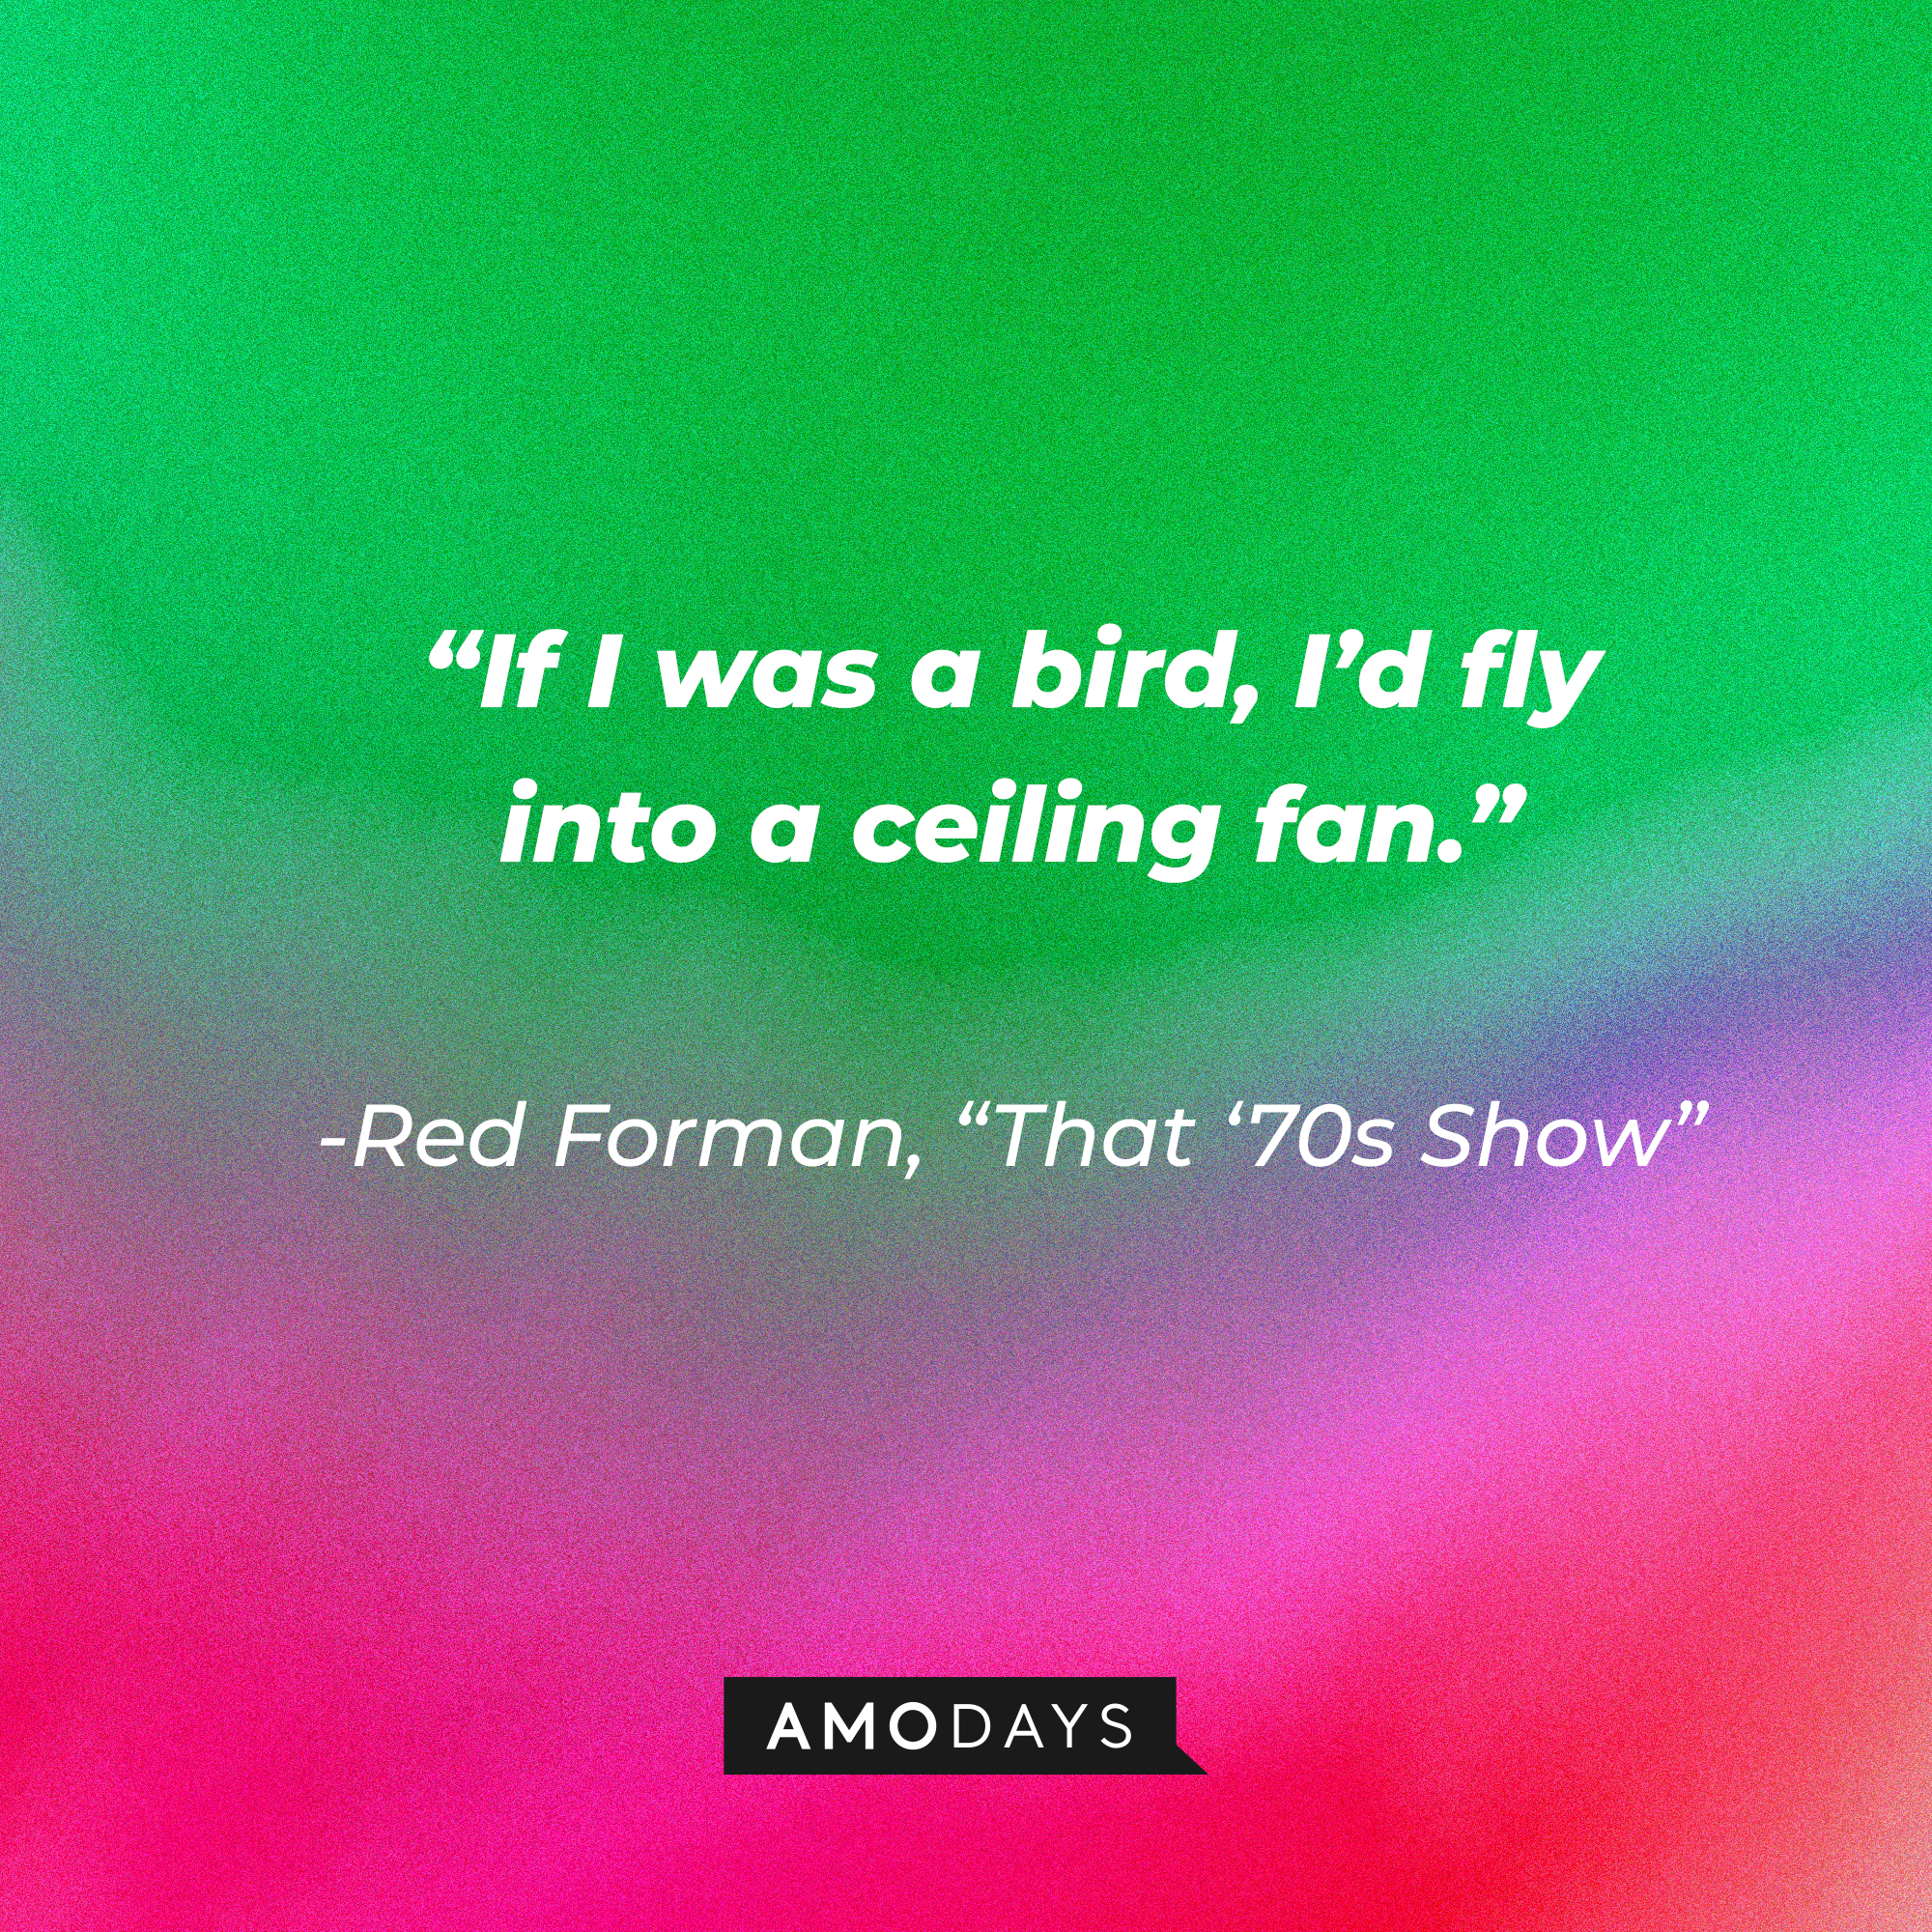 Red Forman's quote from "That '70s Show:" “If I was a bird, I’d fly into a ceiling fan.” | Source: AmoDays